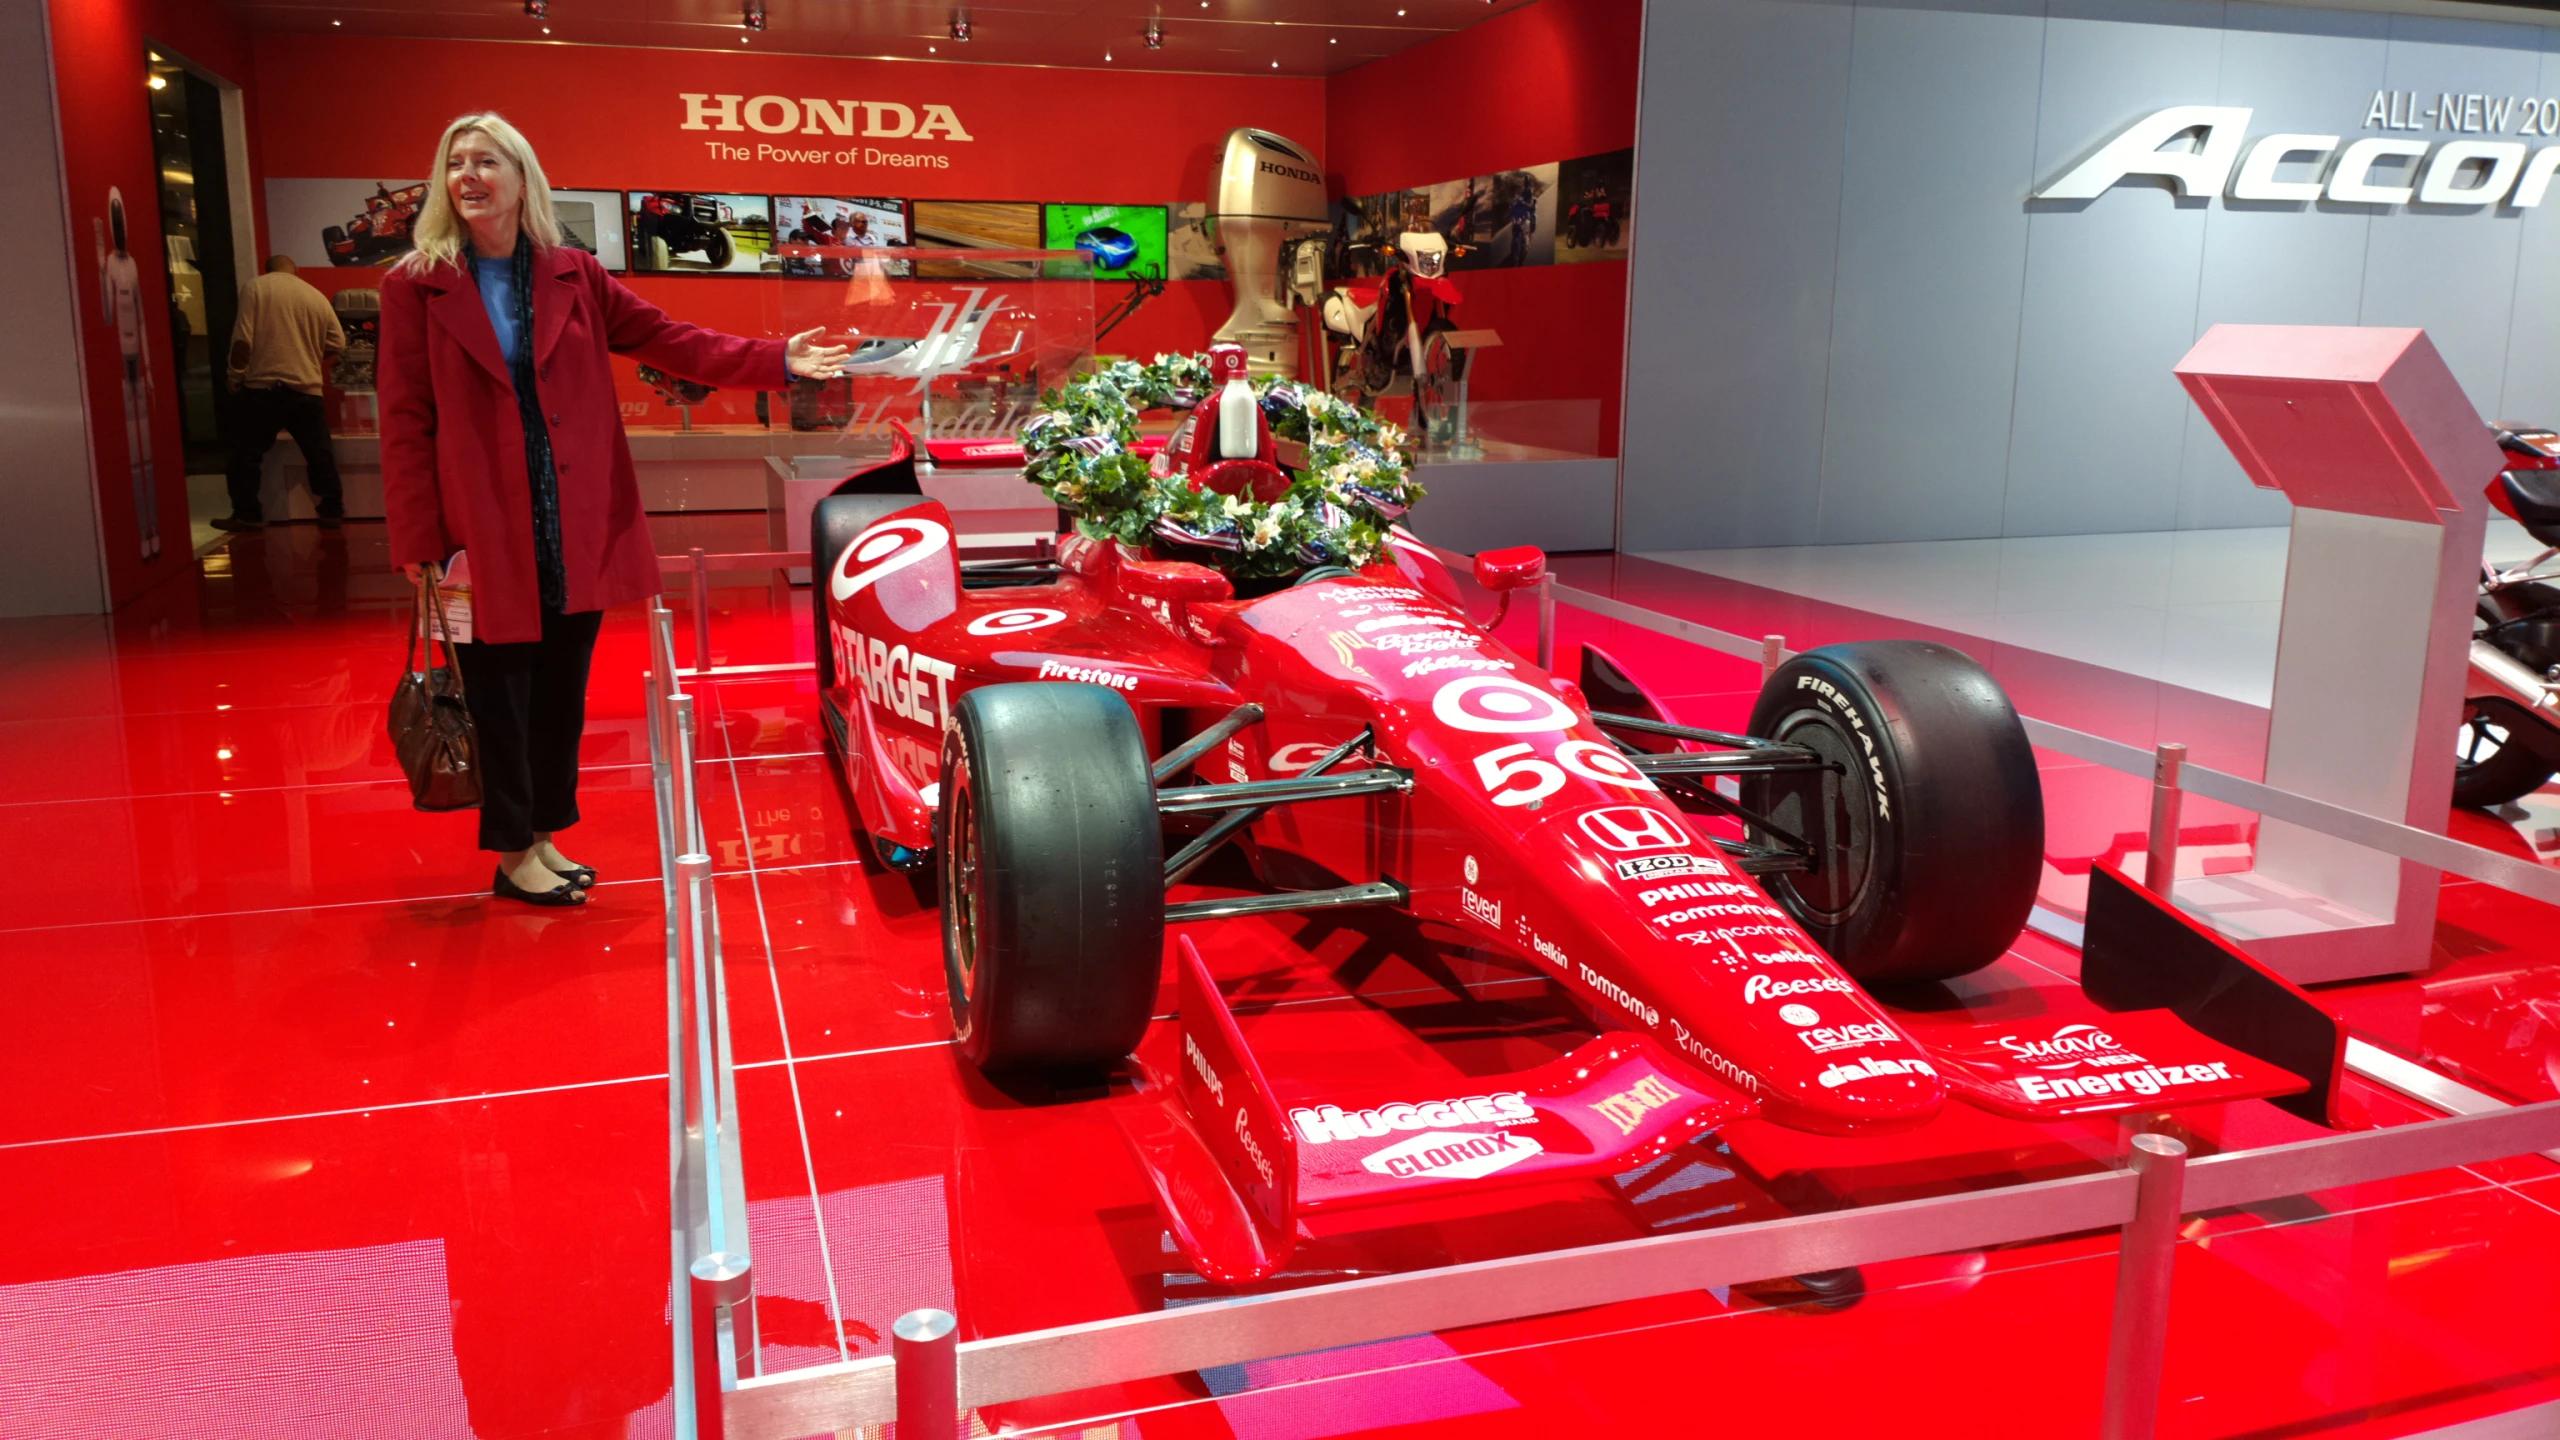 a display of an acond race car in a store